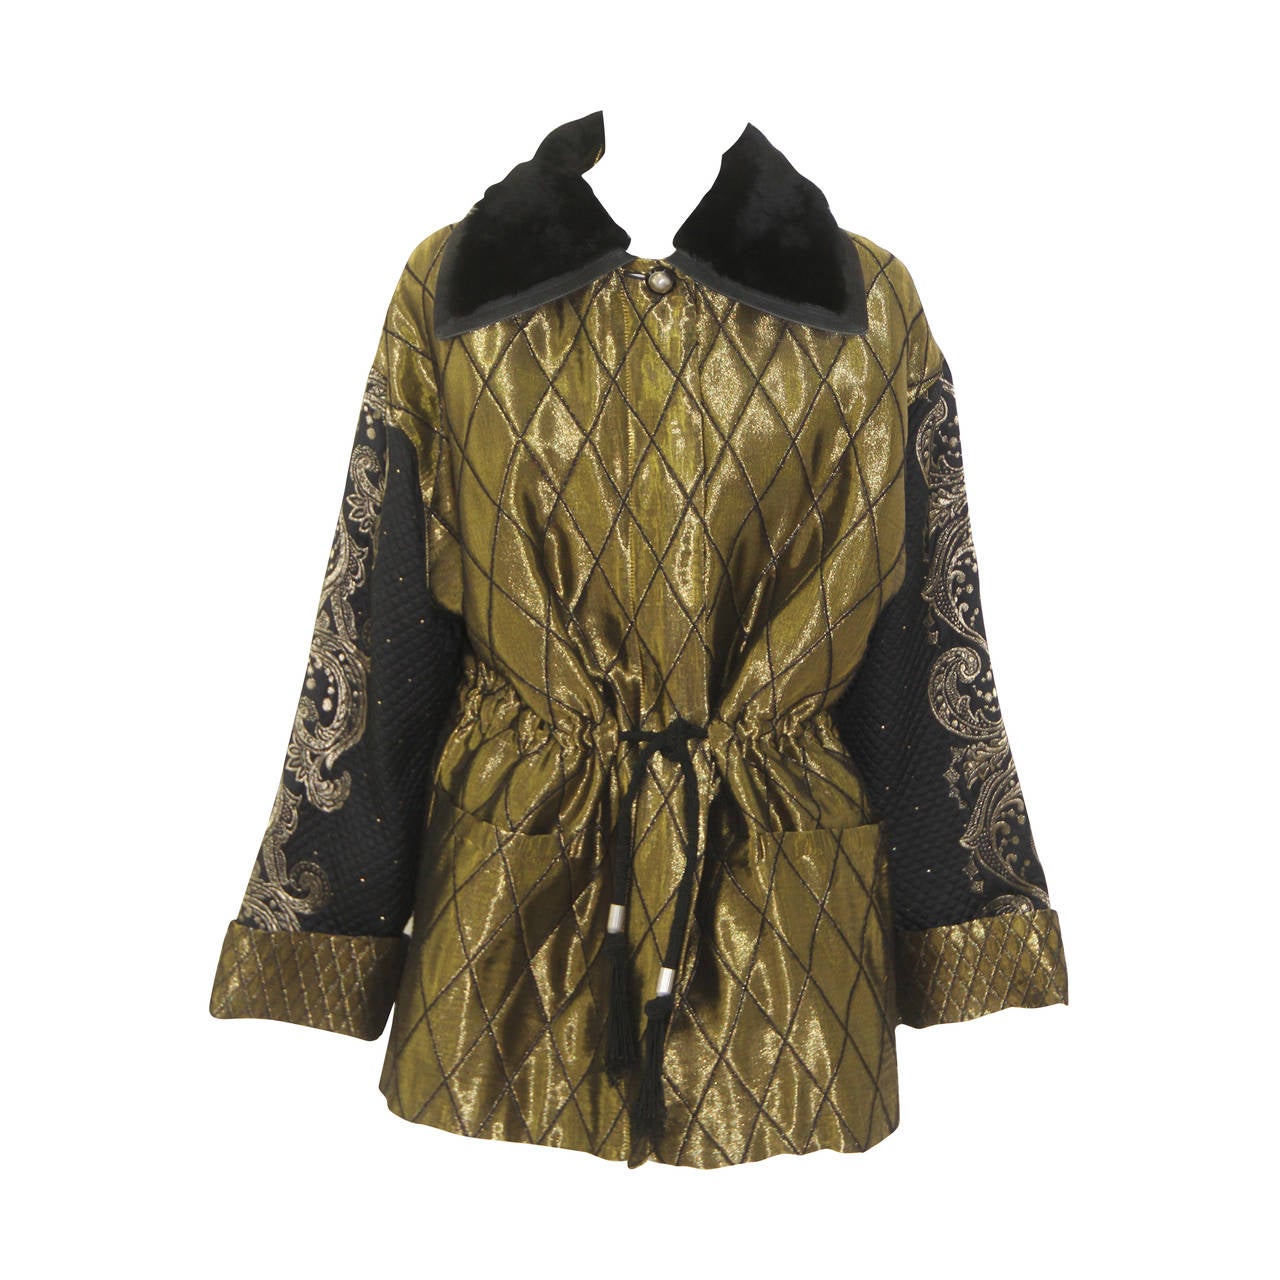 Rare Gianni Versace Silk Metallic Embroidered Parka Jacket Fall 1990 For Sale